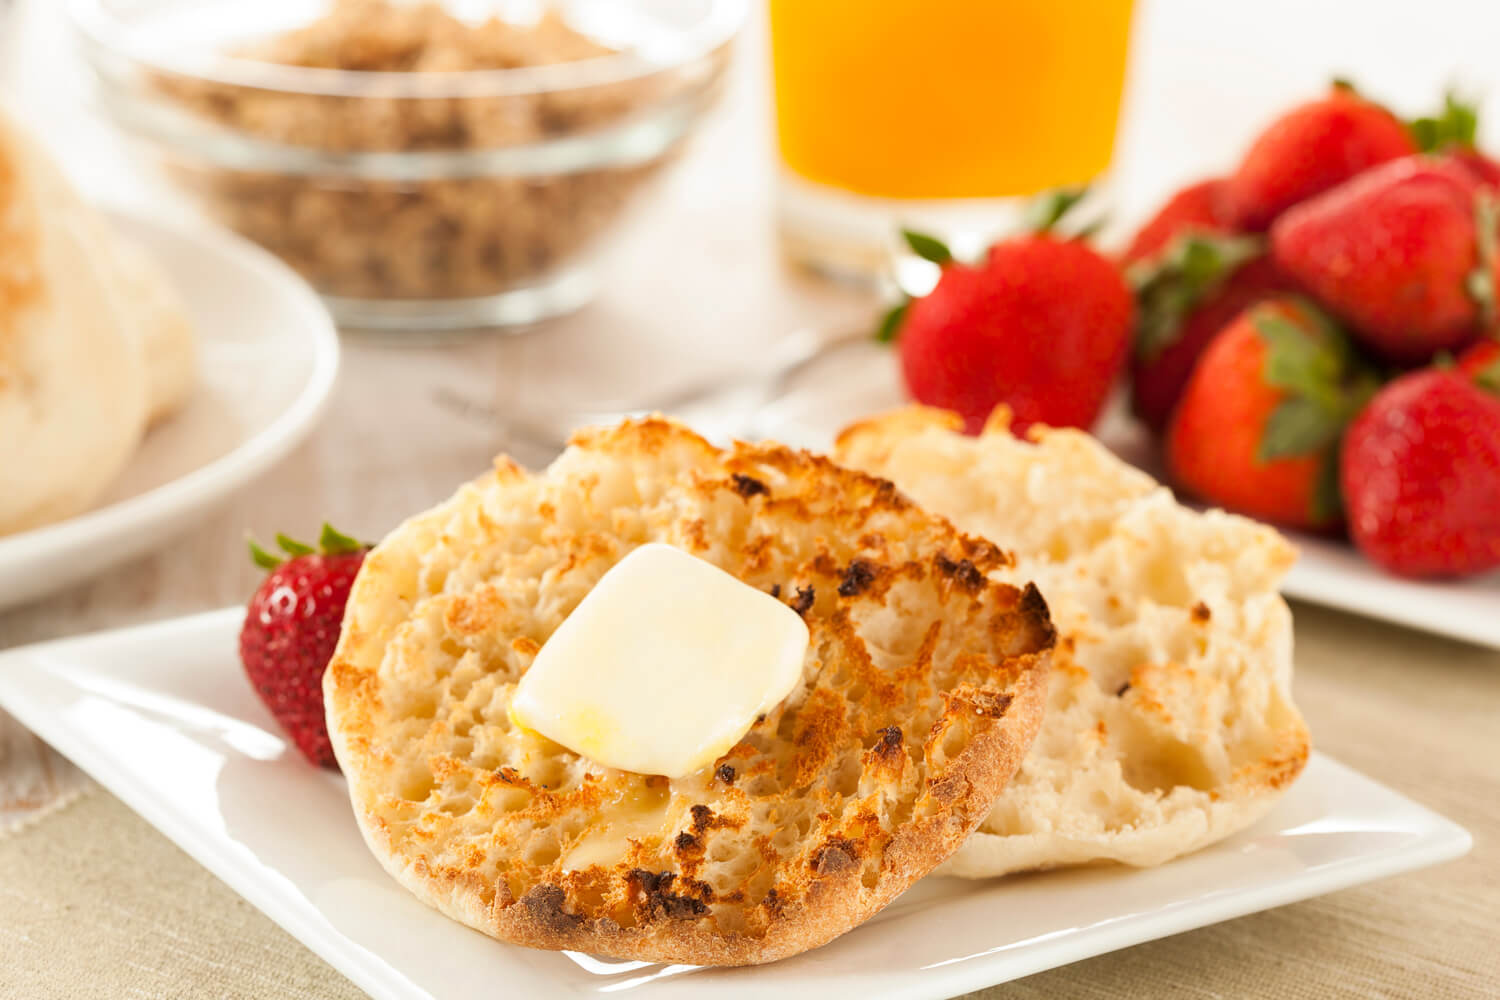 buttery english muffin with strawberries and orange juice